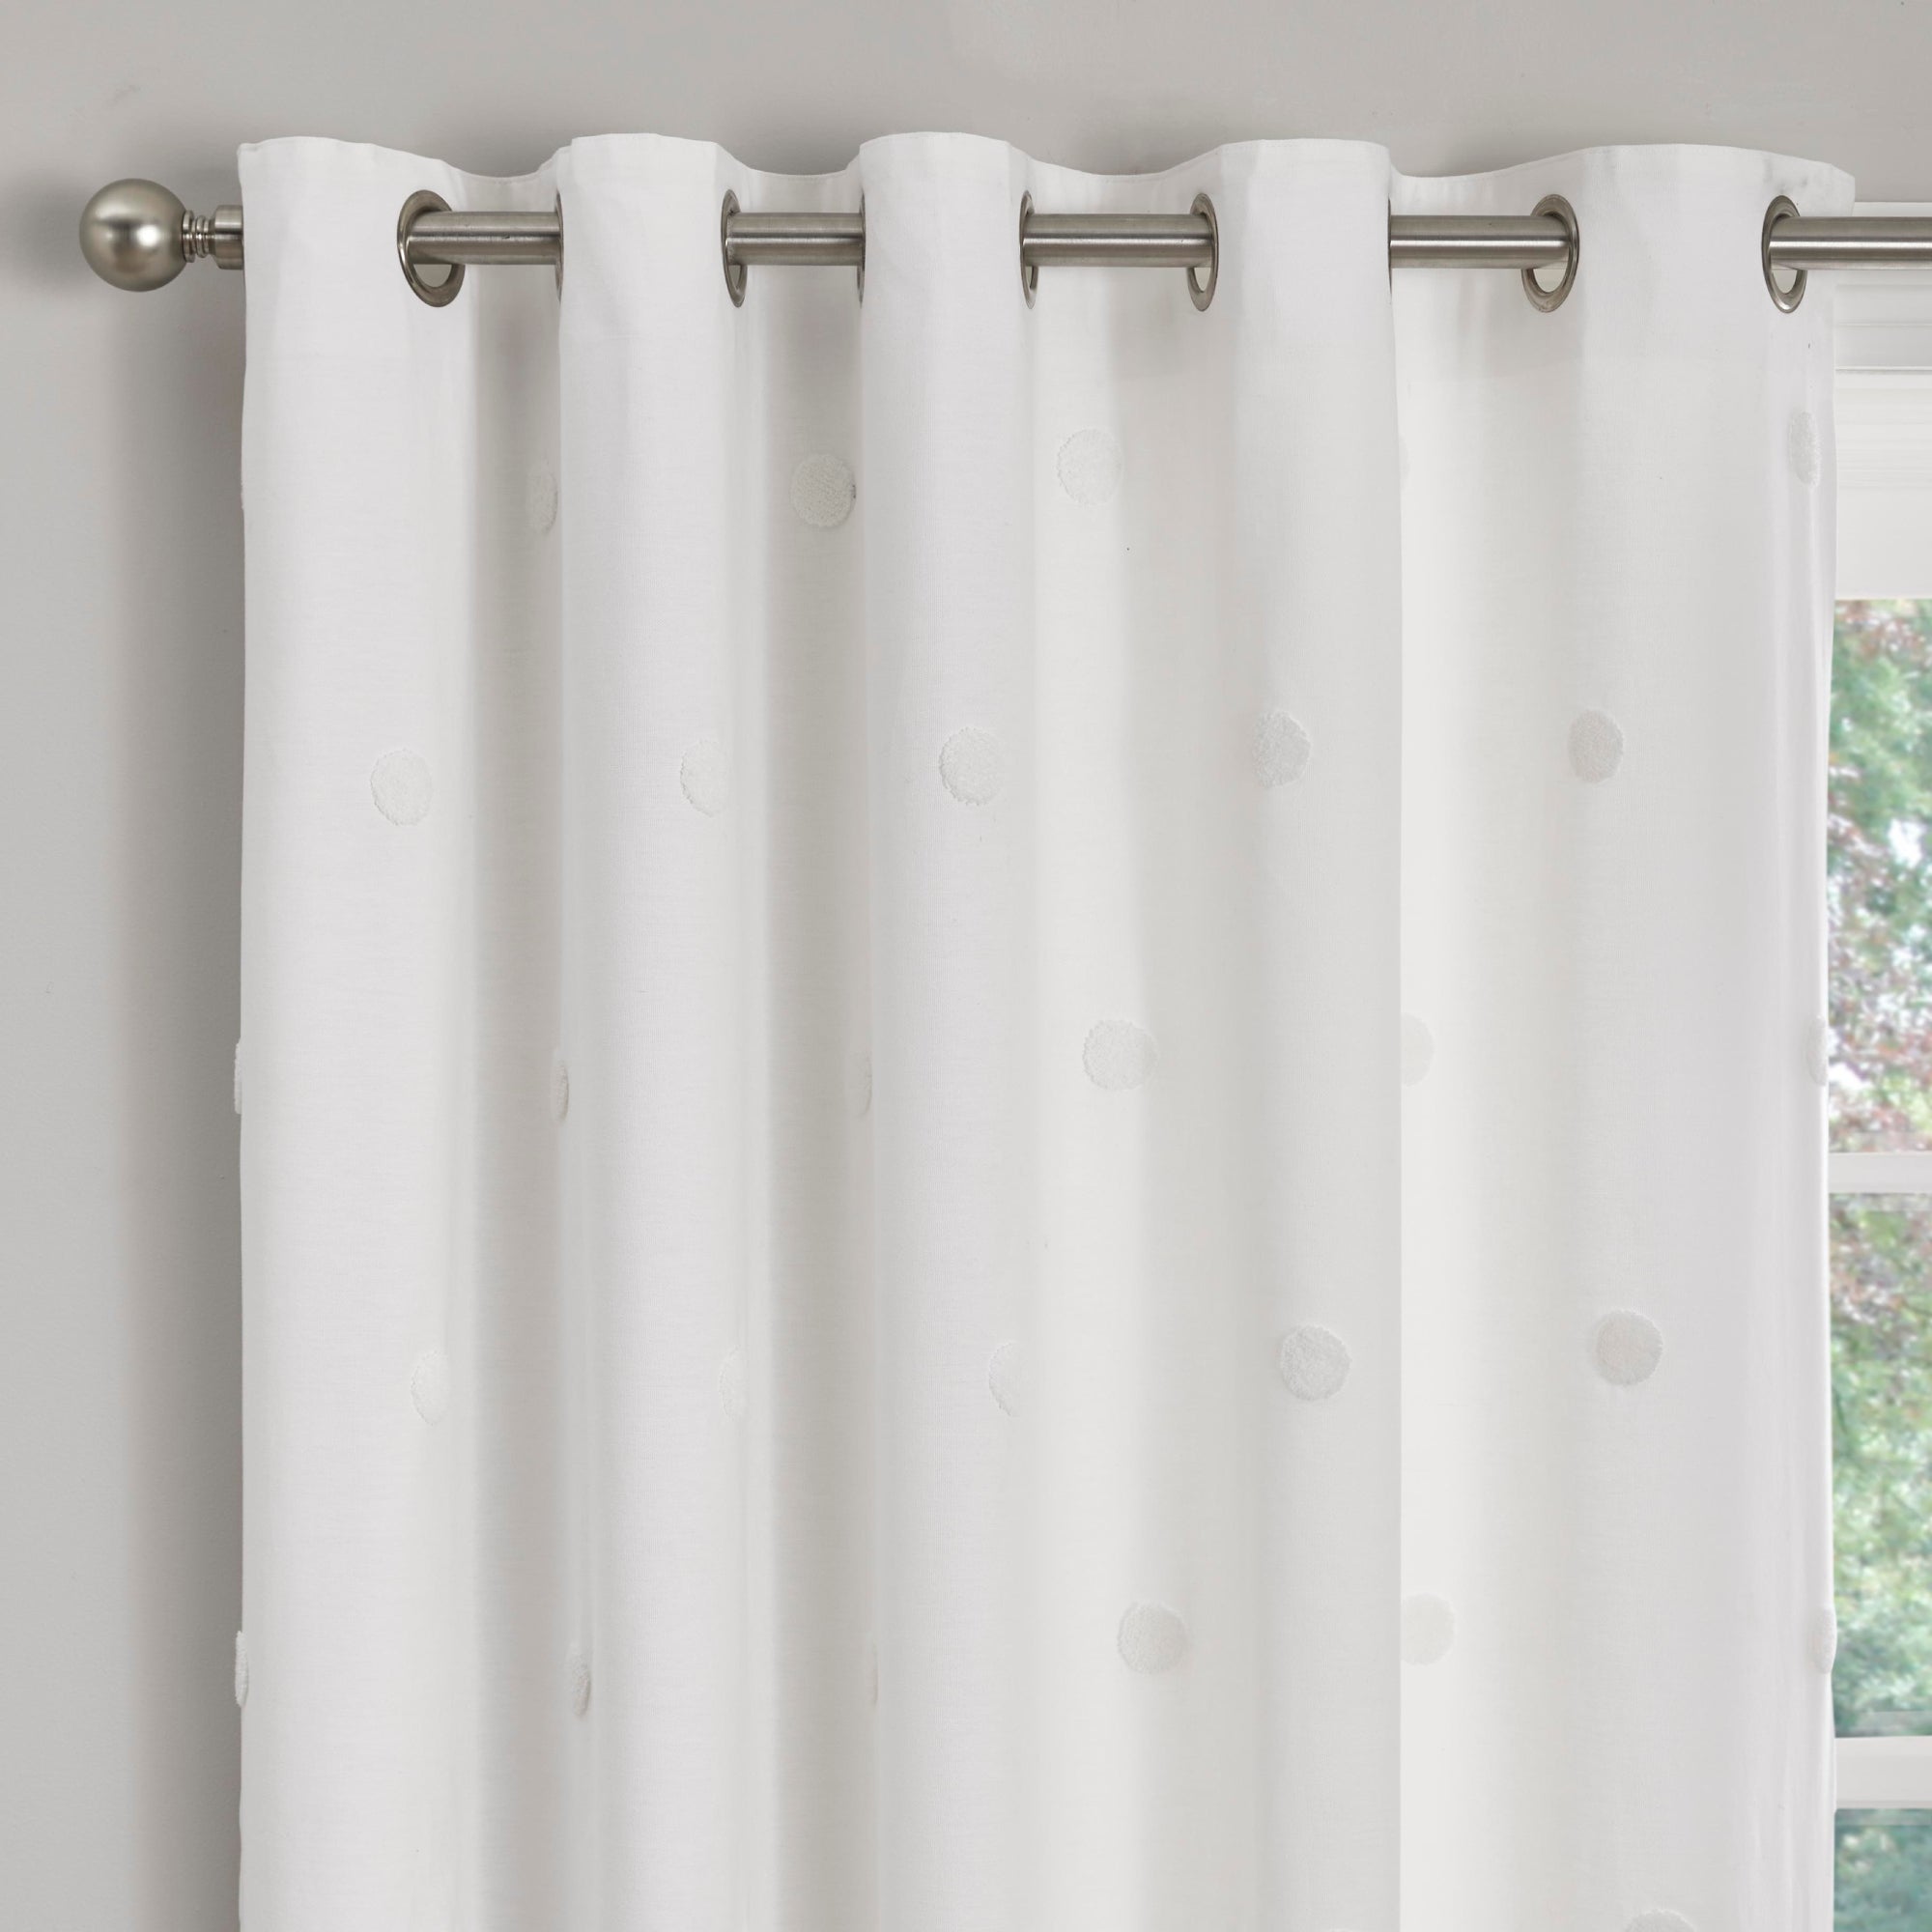 Pair of Eyelet Curtains Zara by Appletree Boutique in White